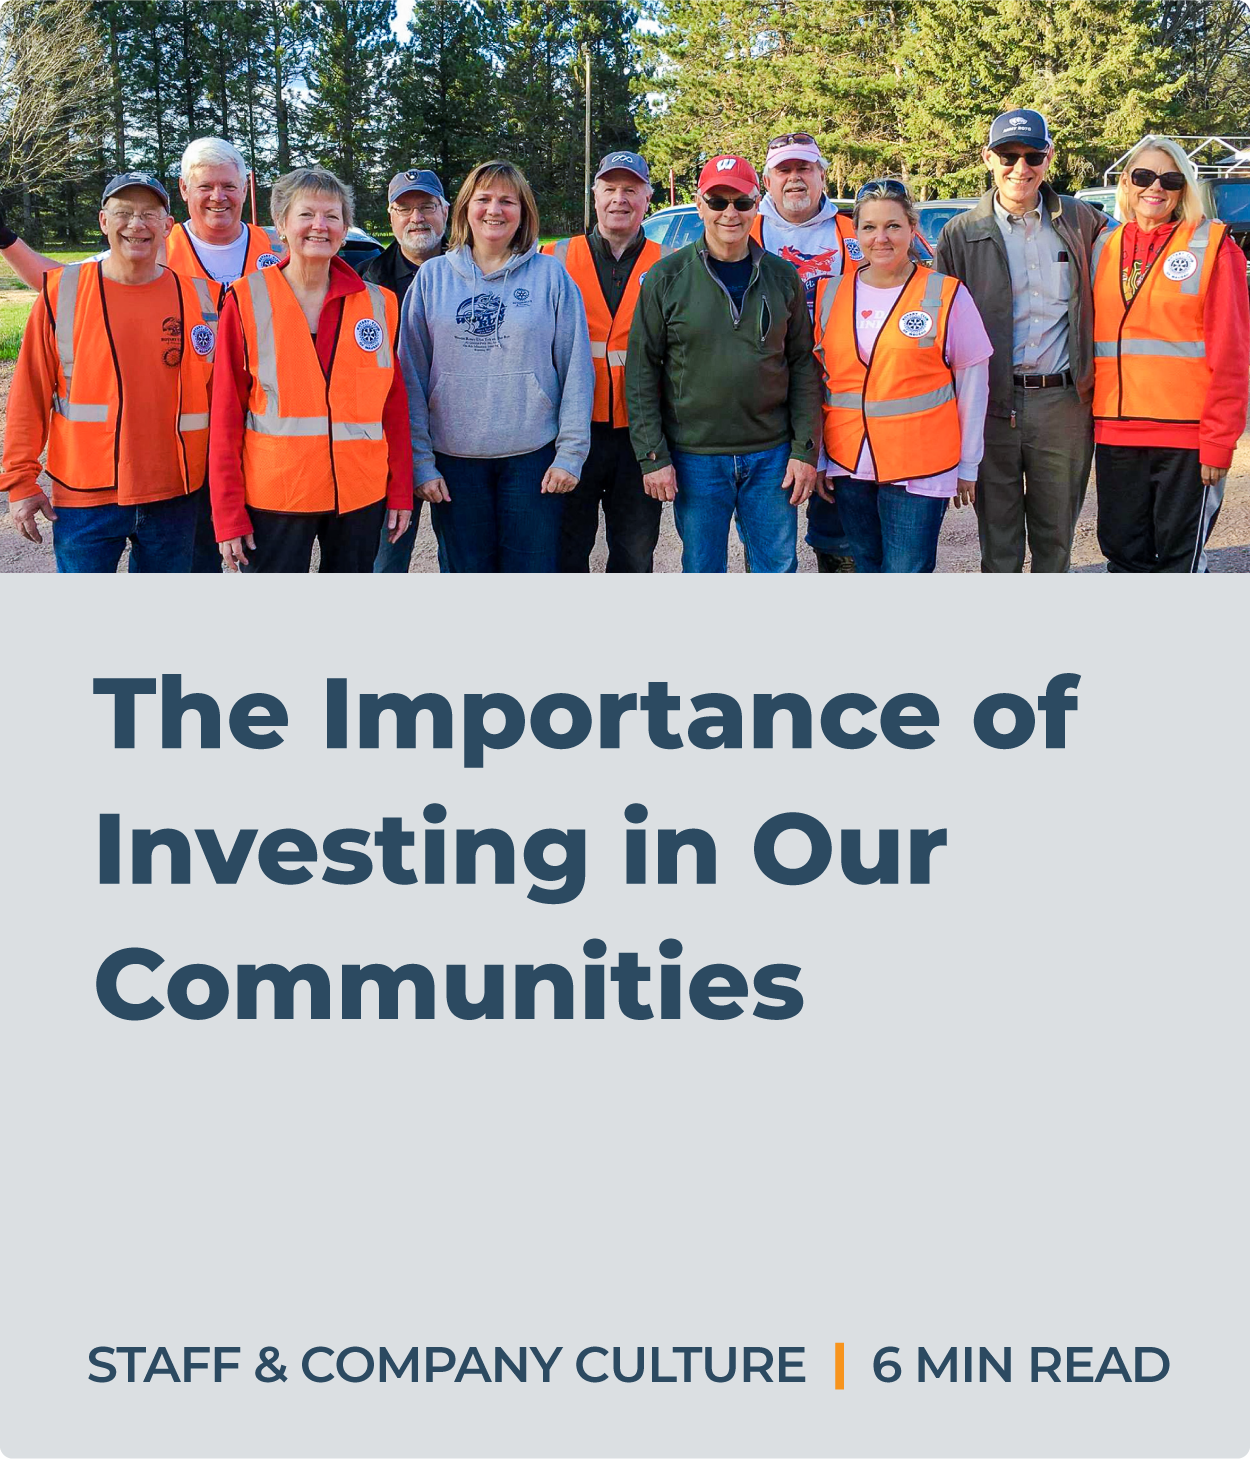 The Importance of Investing in Our Communities